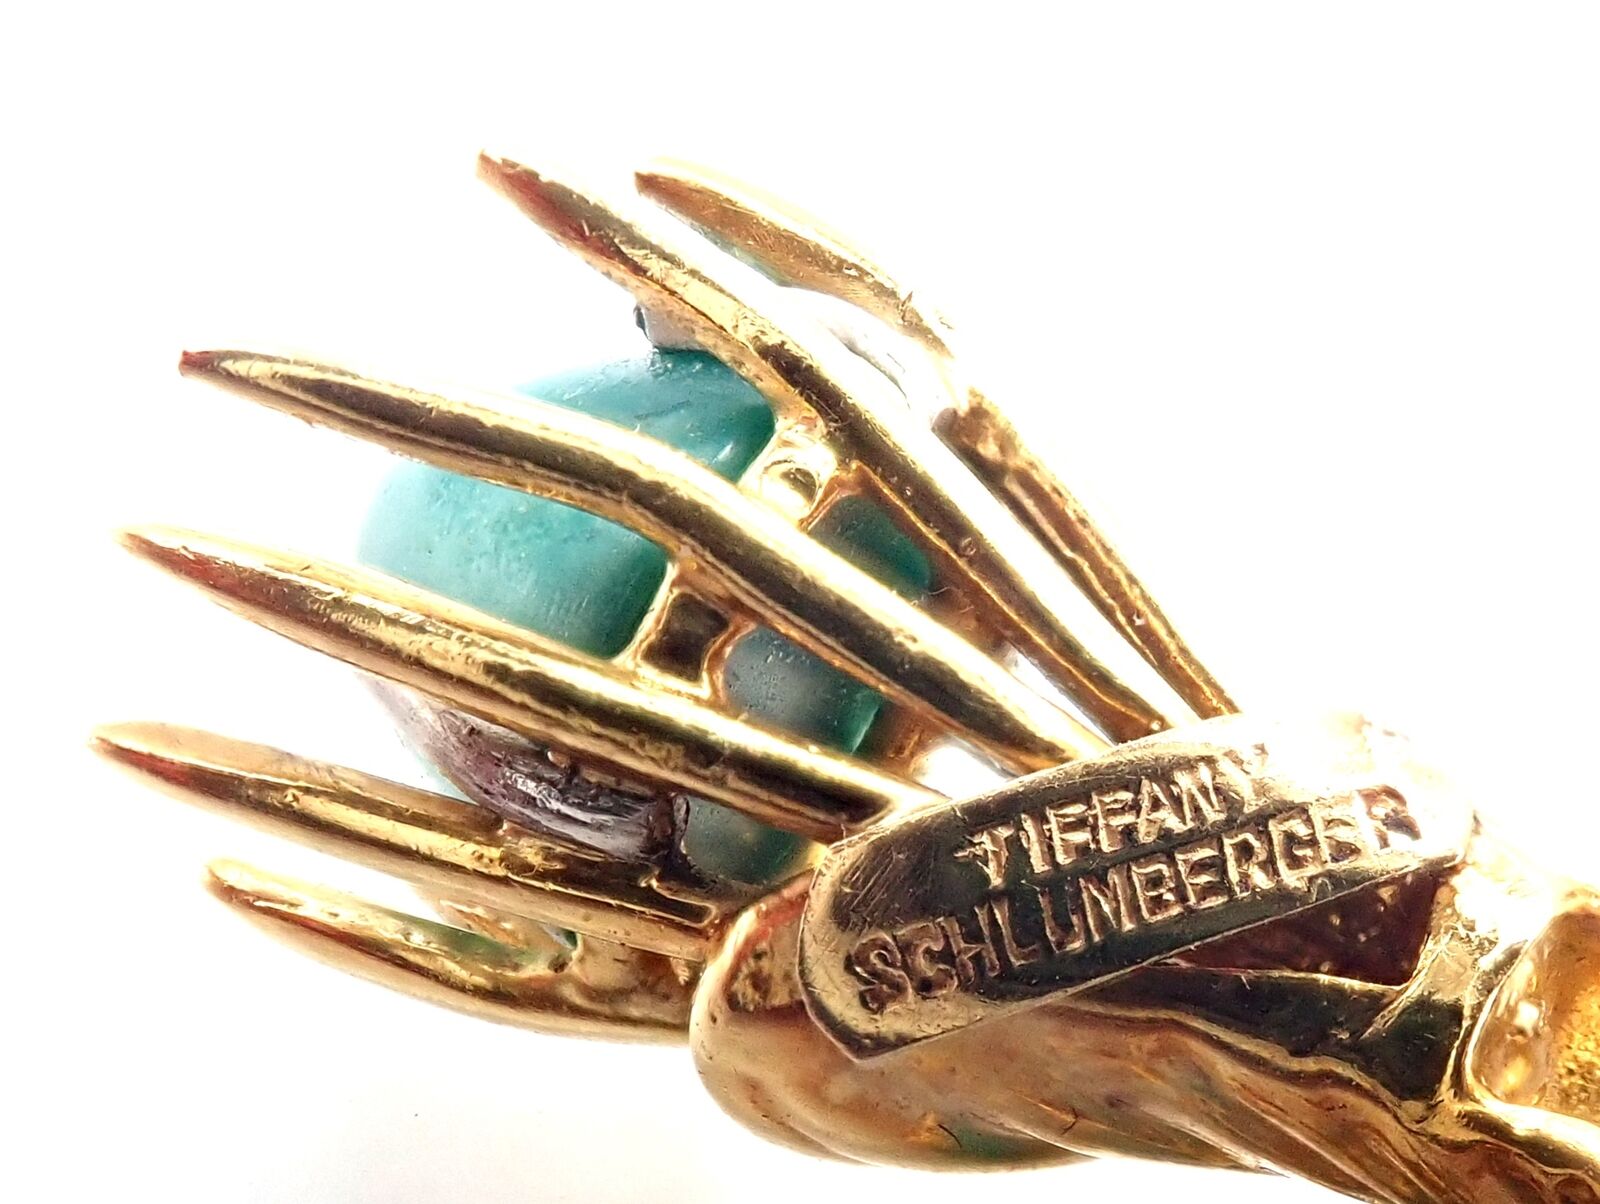 Jean Schlumberger for Tiffany & Co Jewelry & Watches:Fine Jewelry:Brooches & Pins Vintage! Tiffany & Co Schlumberger 18k Yellow Gold Turquoise Heart Pin Brooch